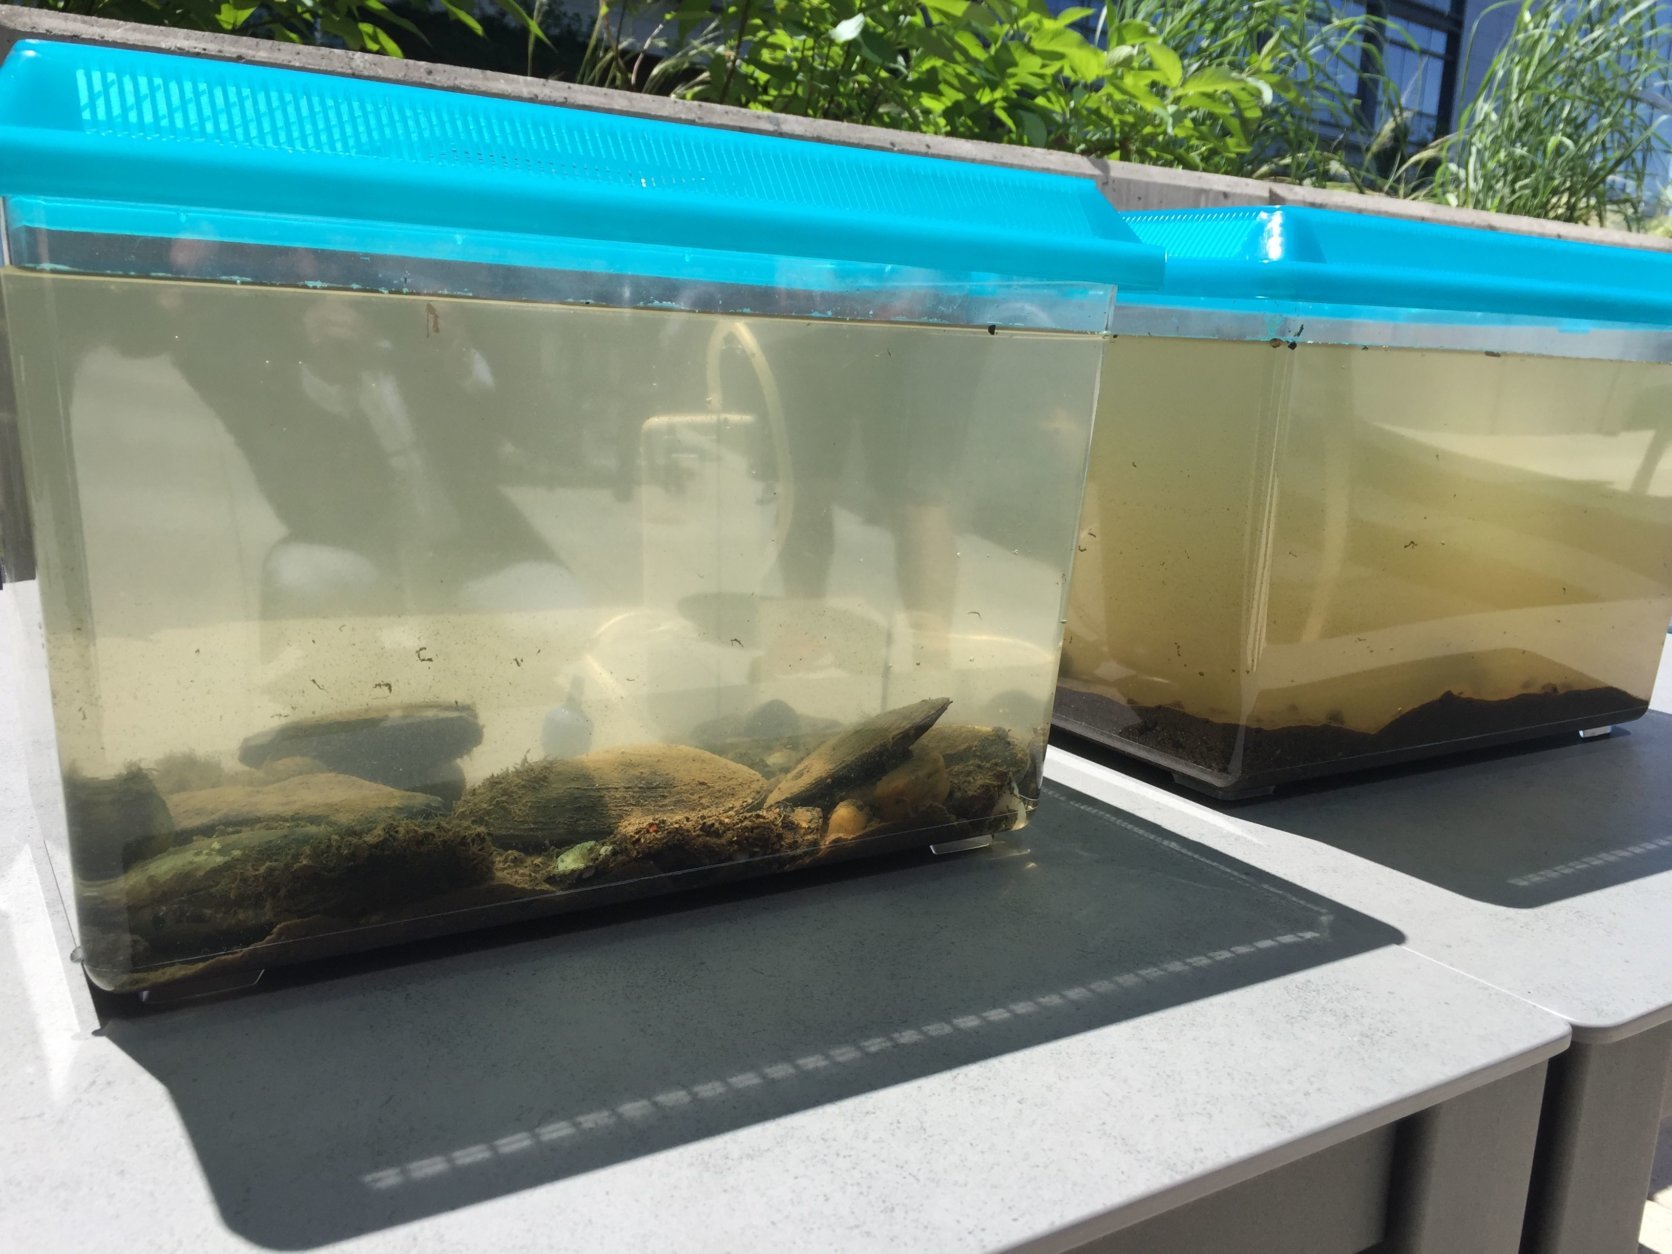 The water in both containers started out the same, but the one on the left is cleaner after an hour and a half of playing host to five water-filtering mussels. (WTOP/Kristi King)